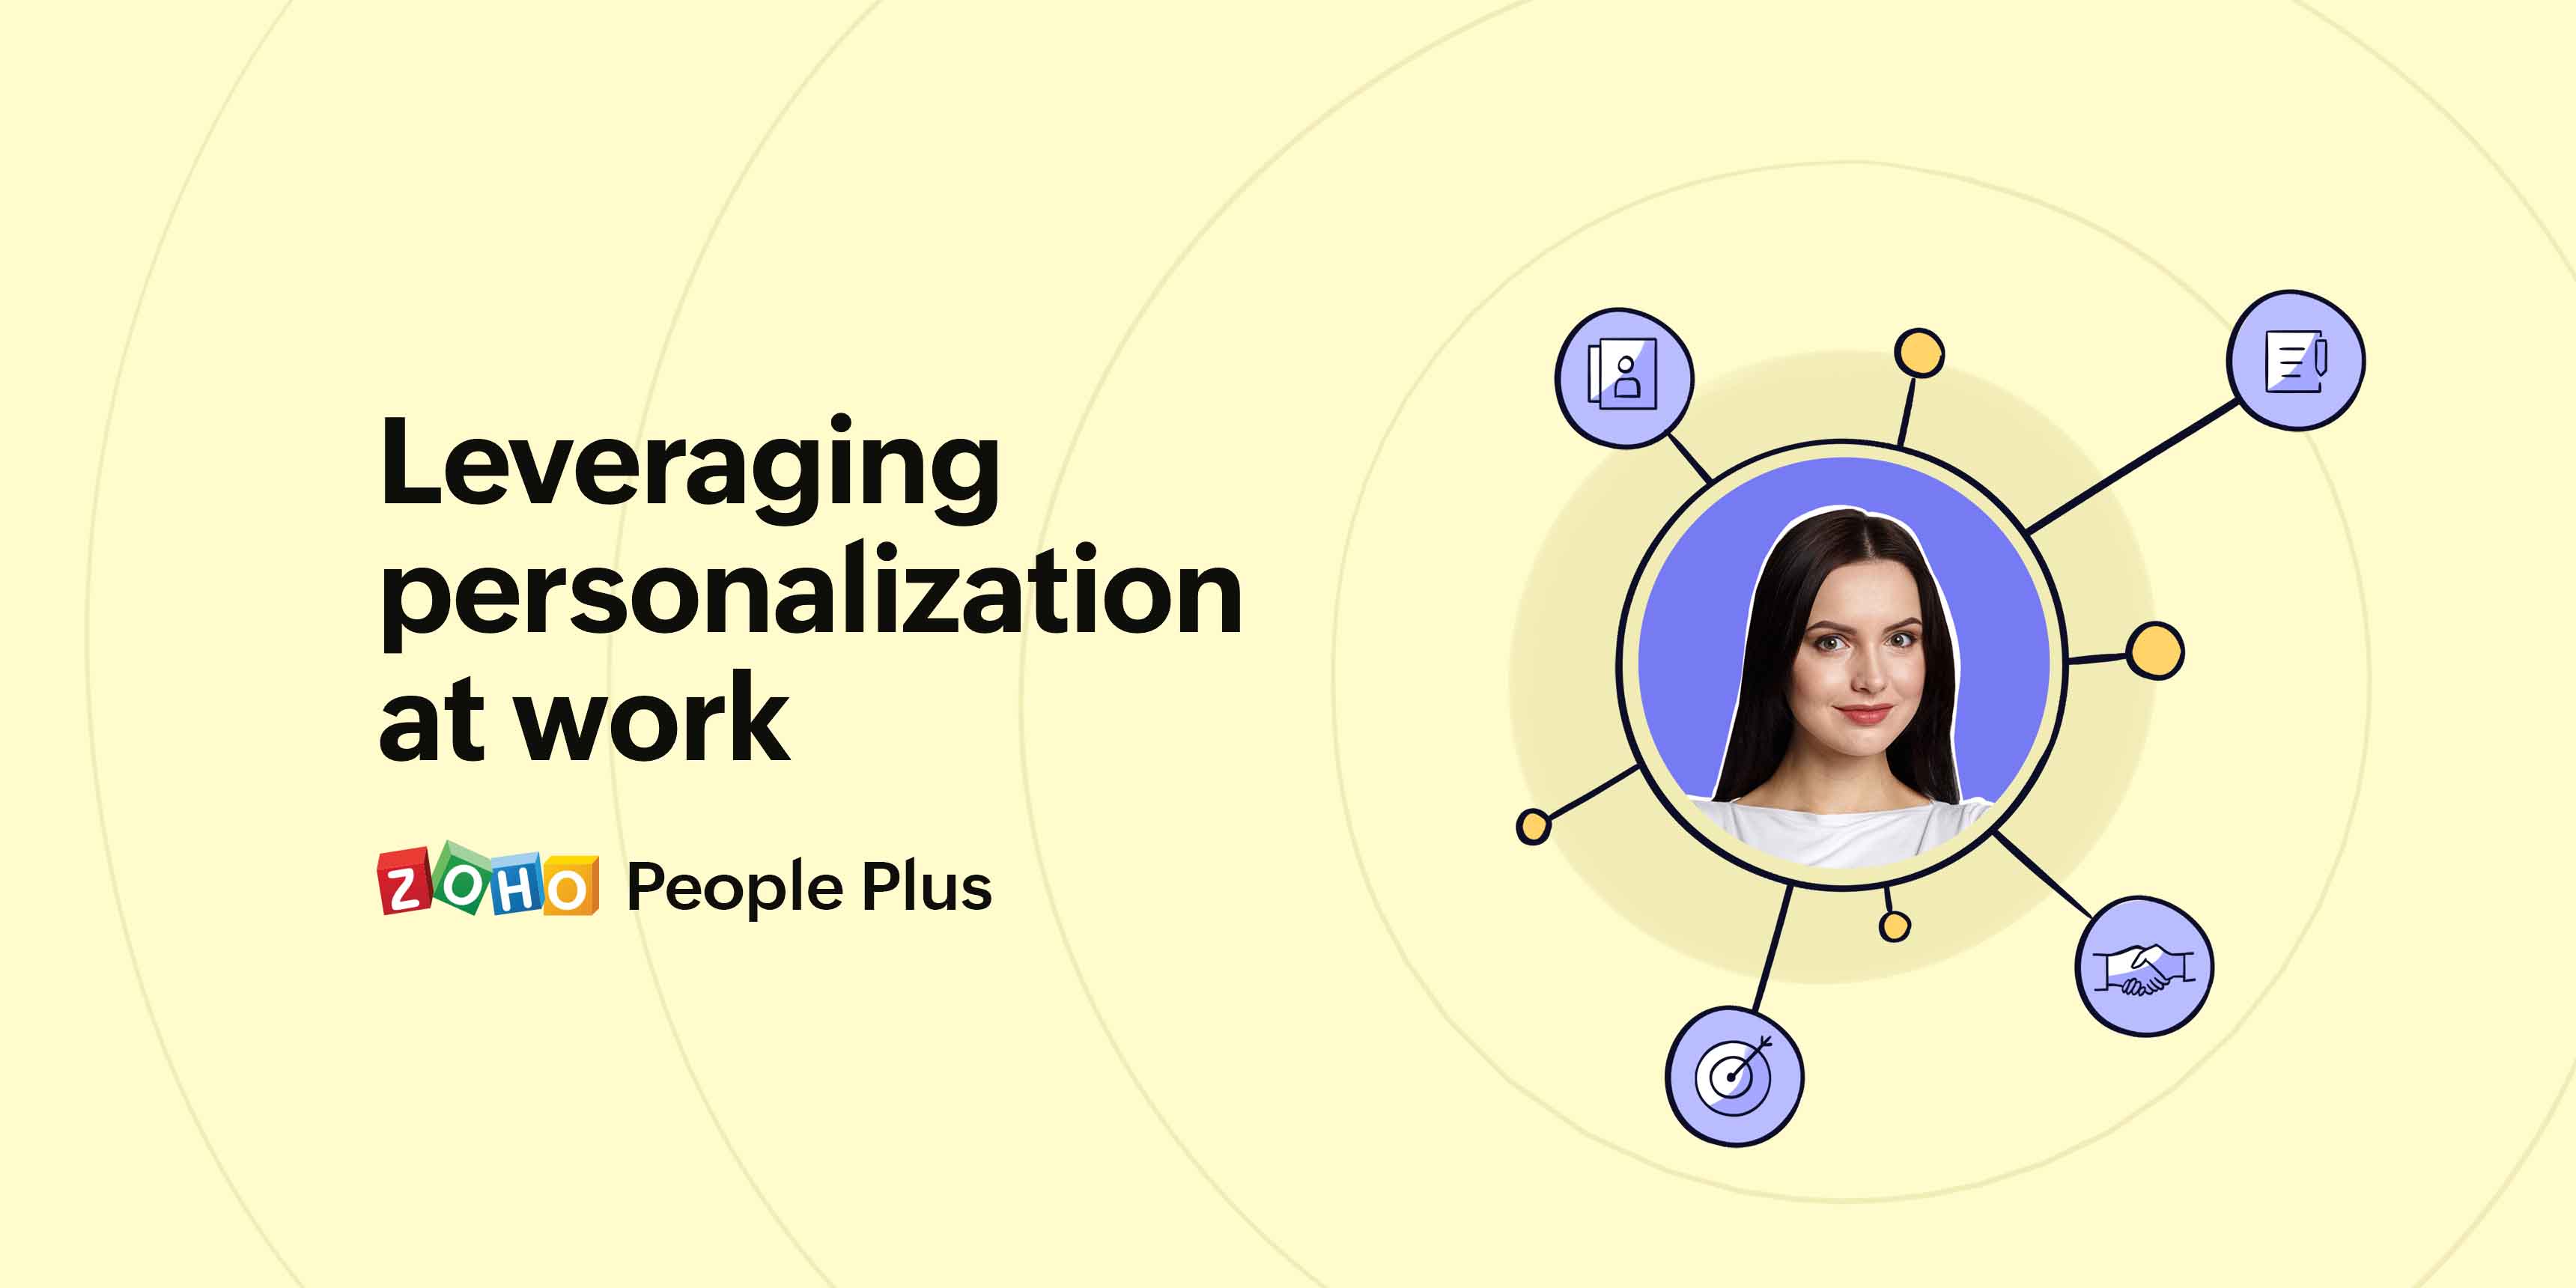 Leveraging personalization in the workplace